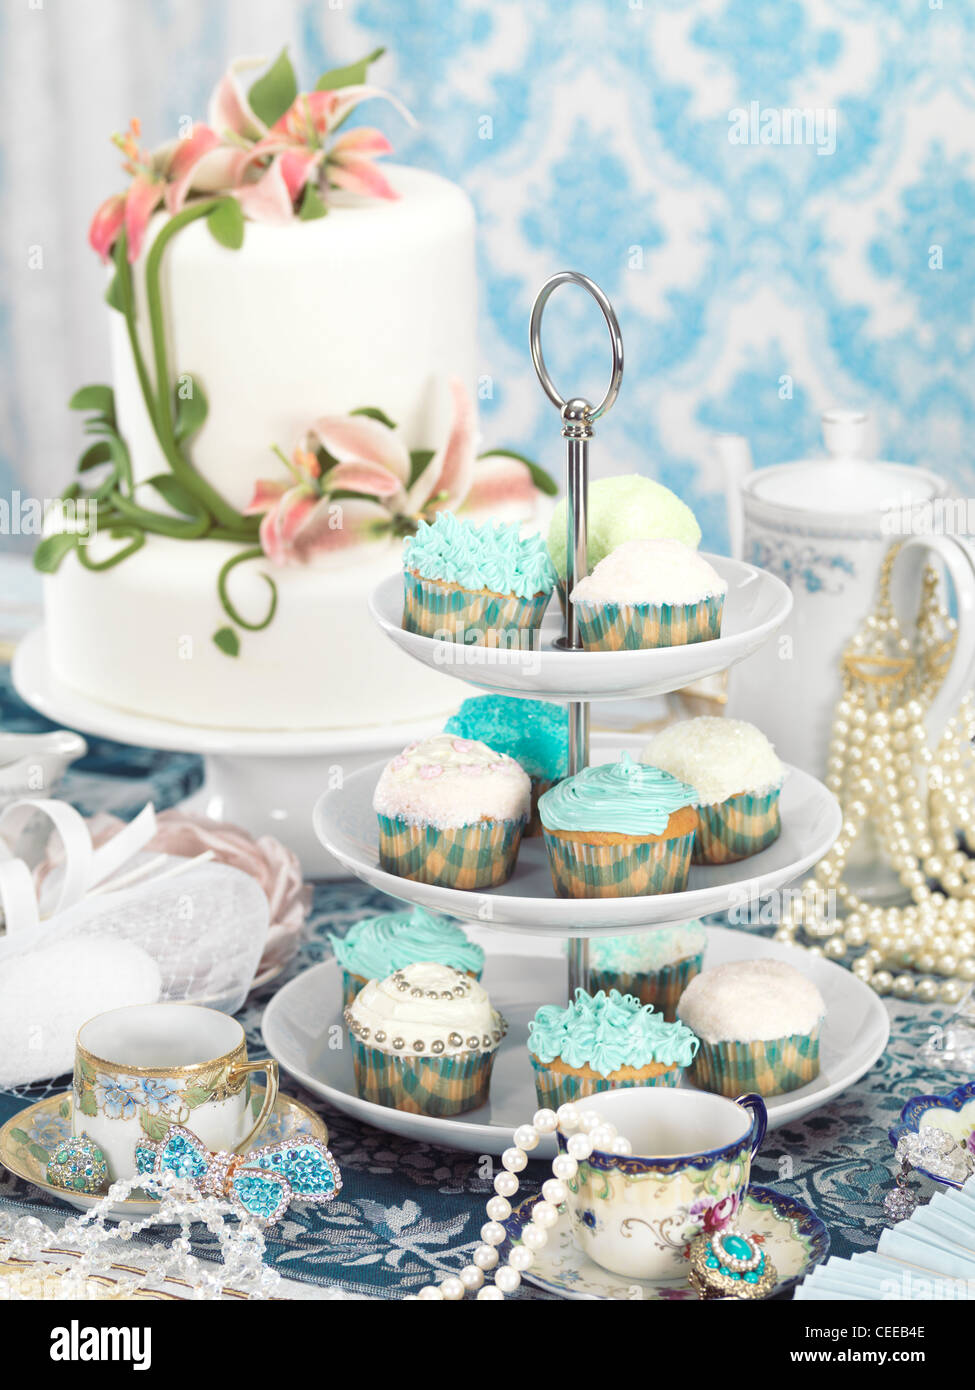 Still life photo of a luxurious tea party with sweets, jewellery and accessories Stock Photo